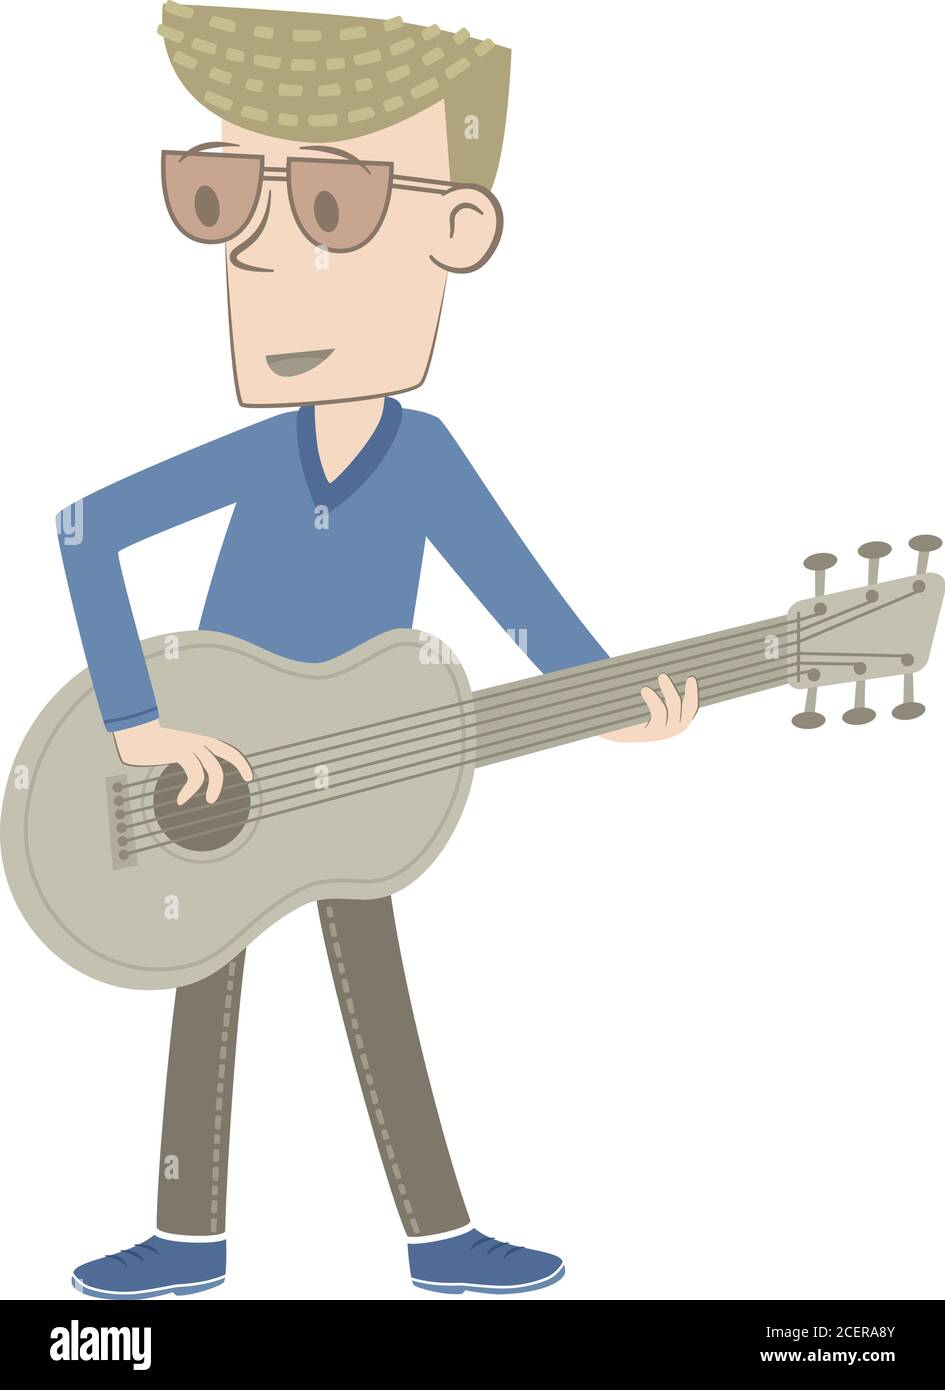 Retro style illustration of a little boy playing the guitar. Stock Vector